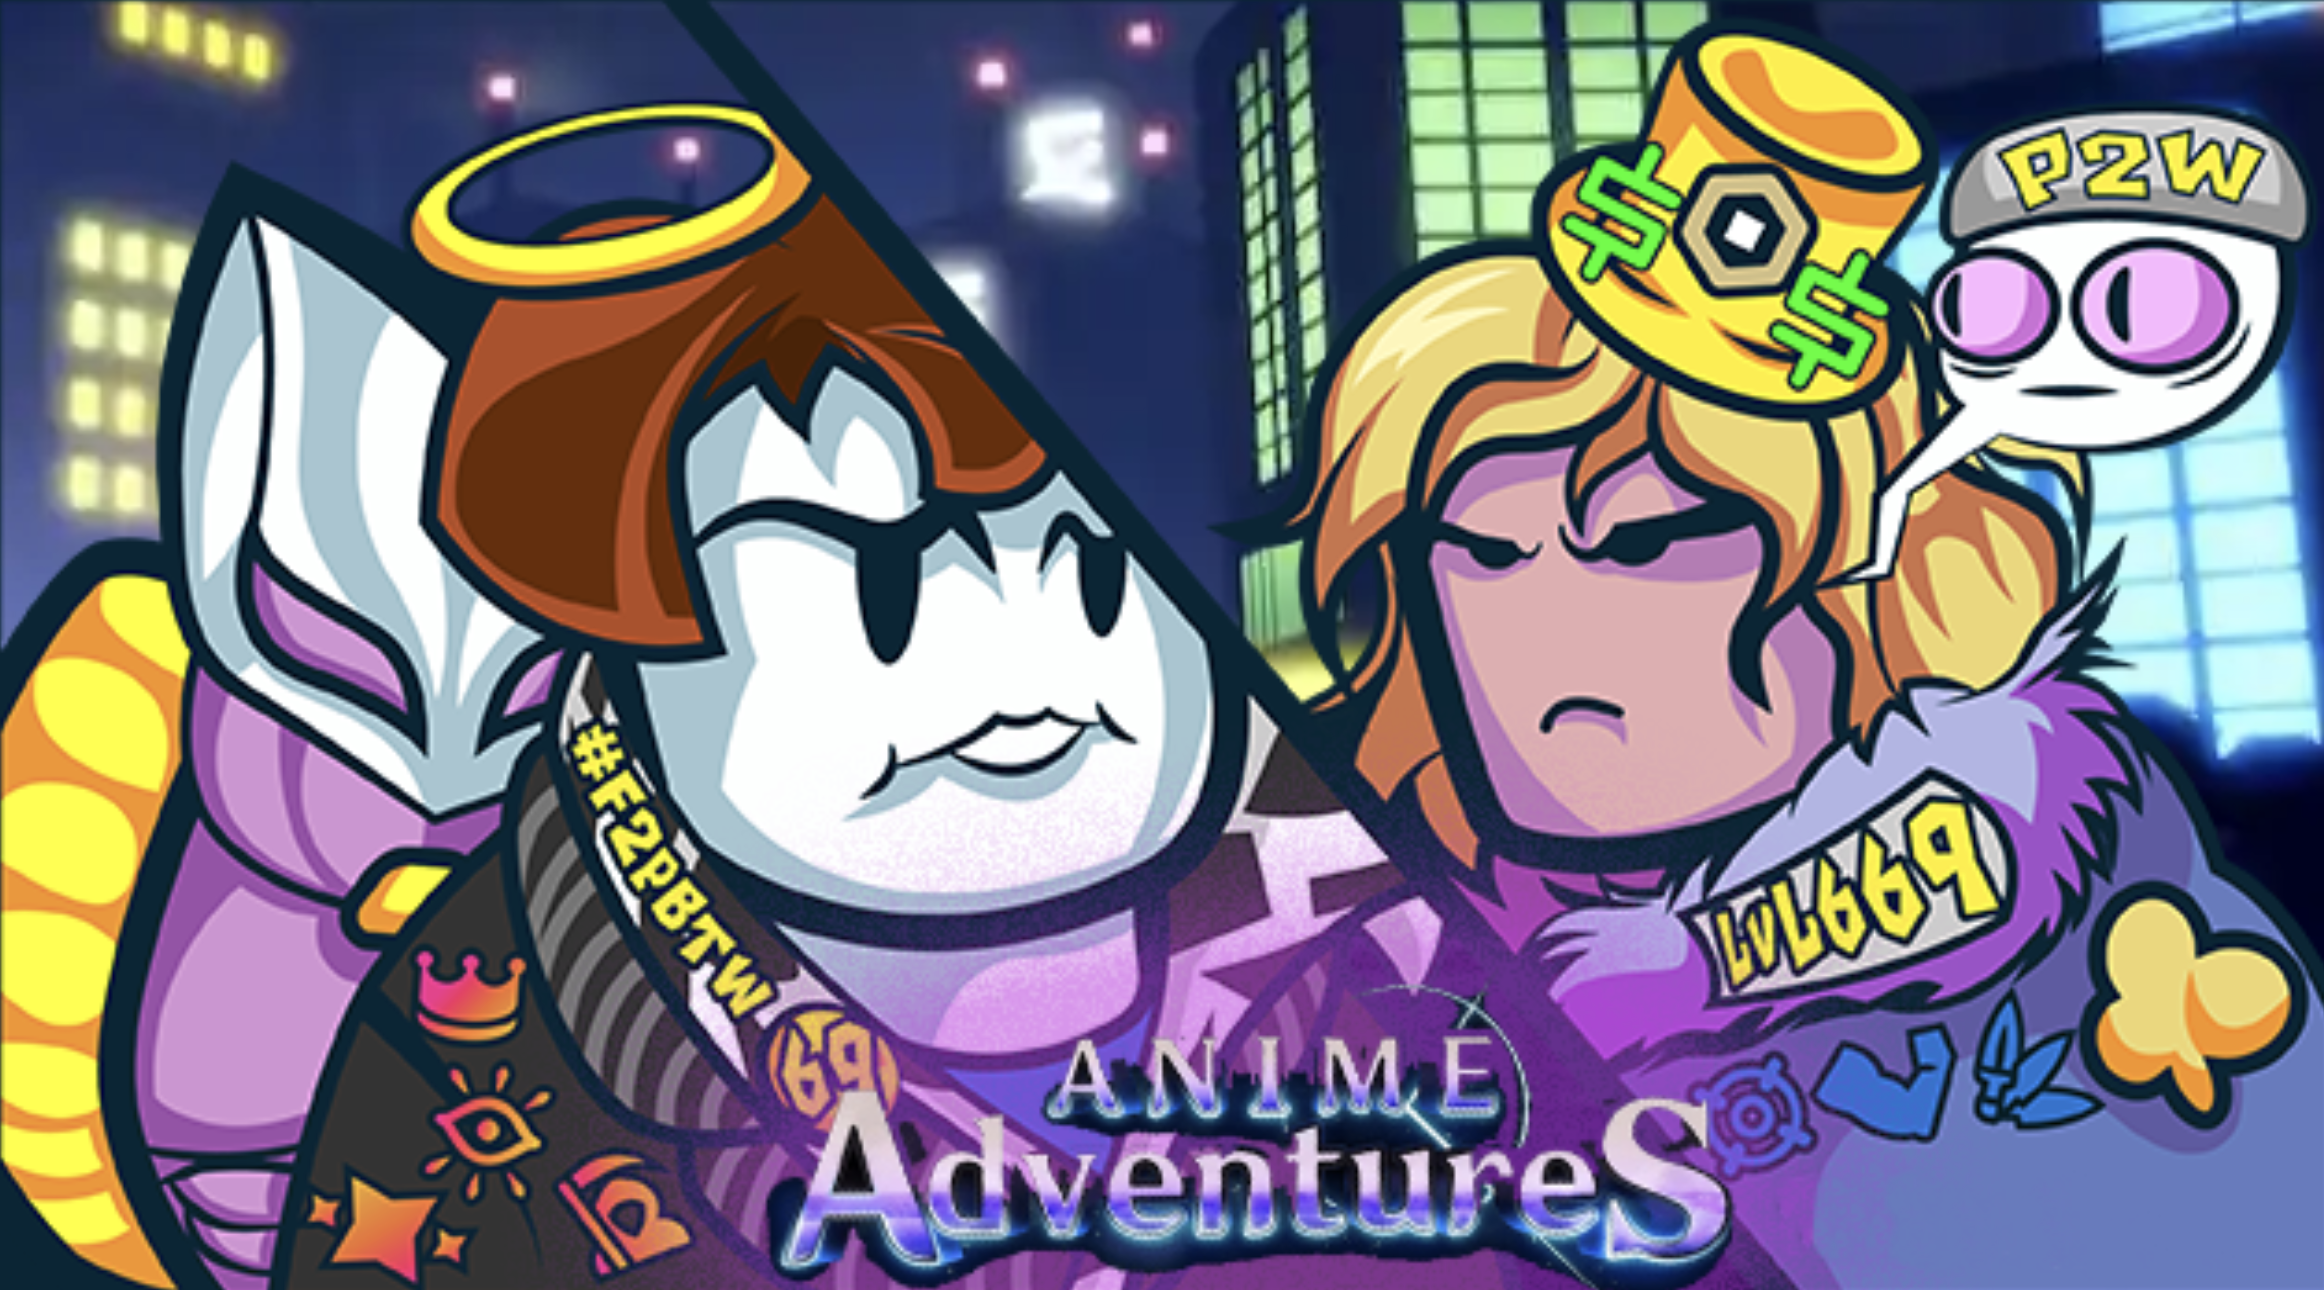 ALL NEW WORKING CODES FOR ANIME ADVENTURES IN 2023 ROBLOX ANIME ADVENTURES  CODES  YouTube